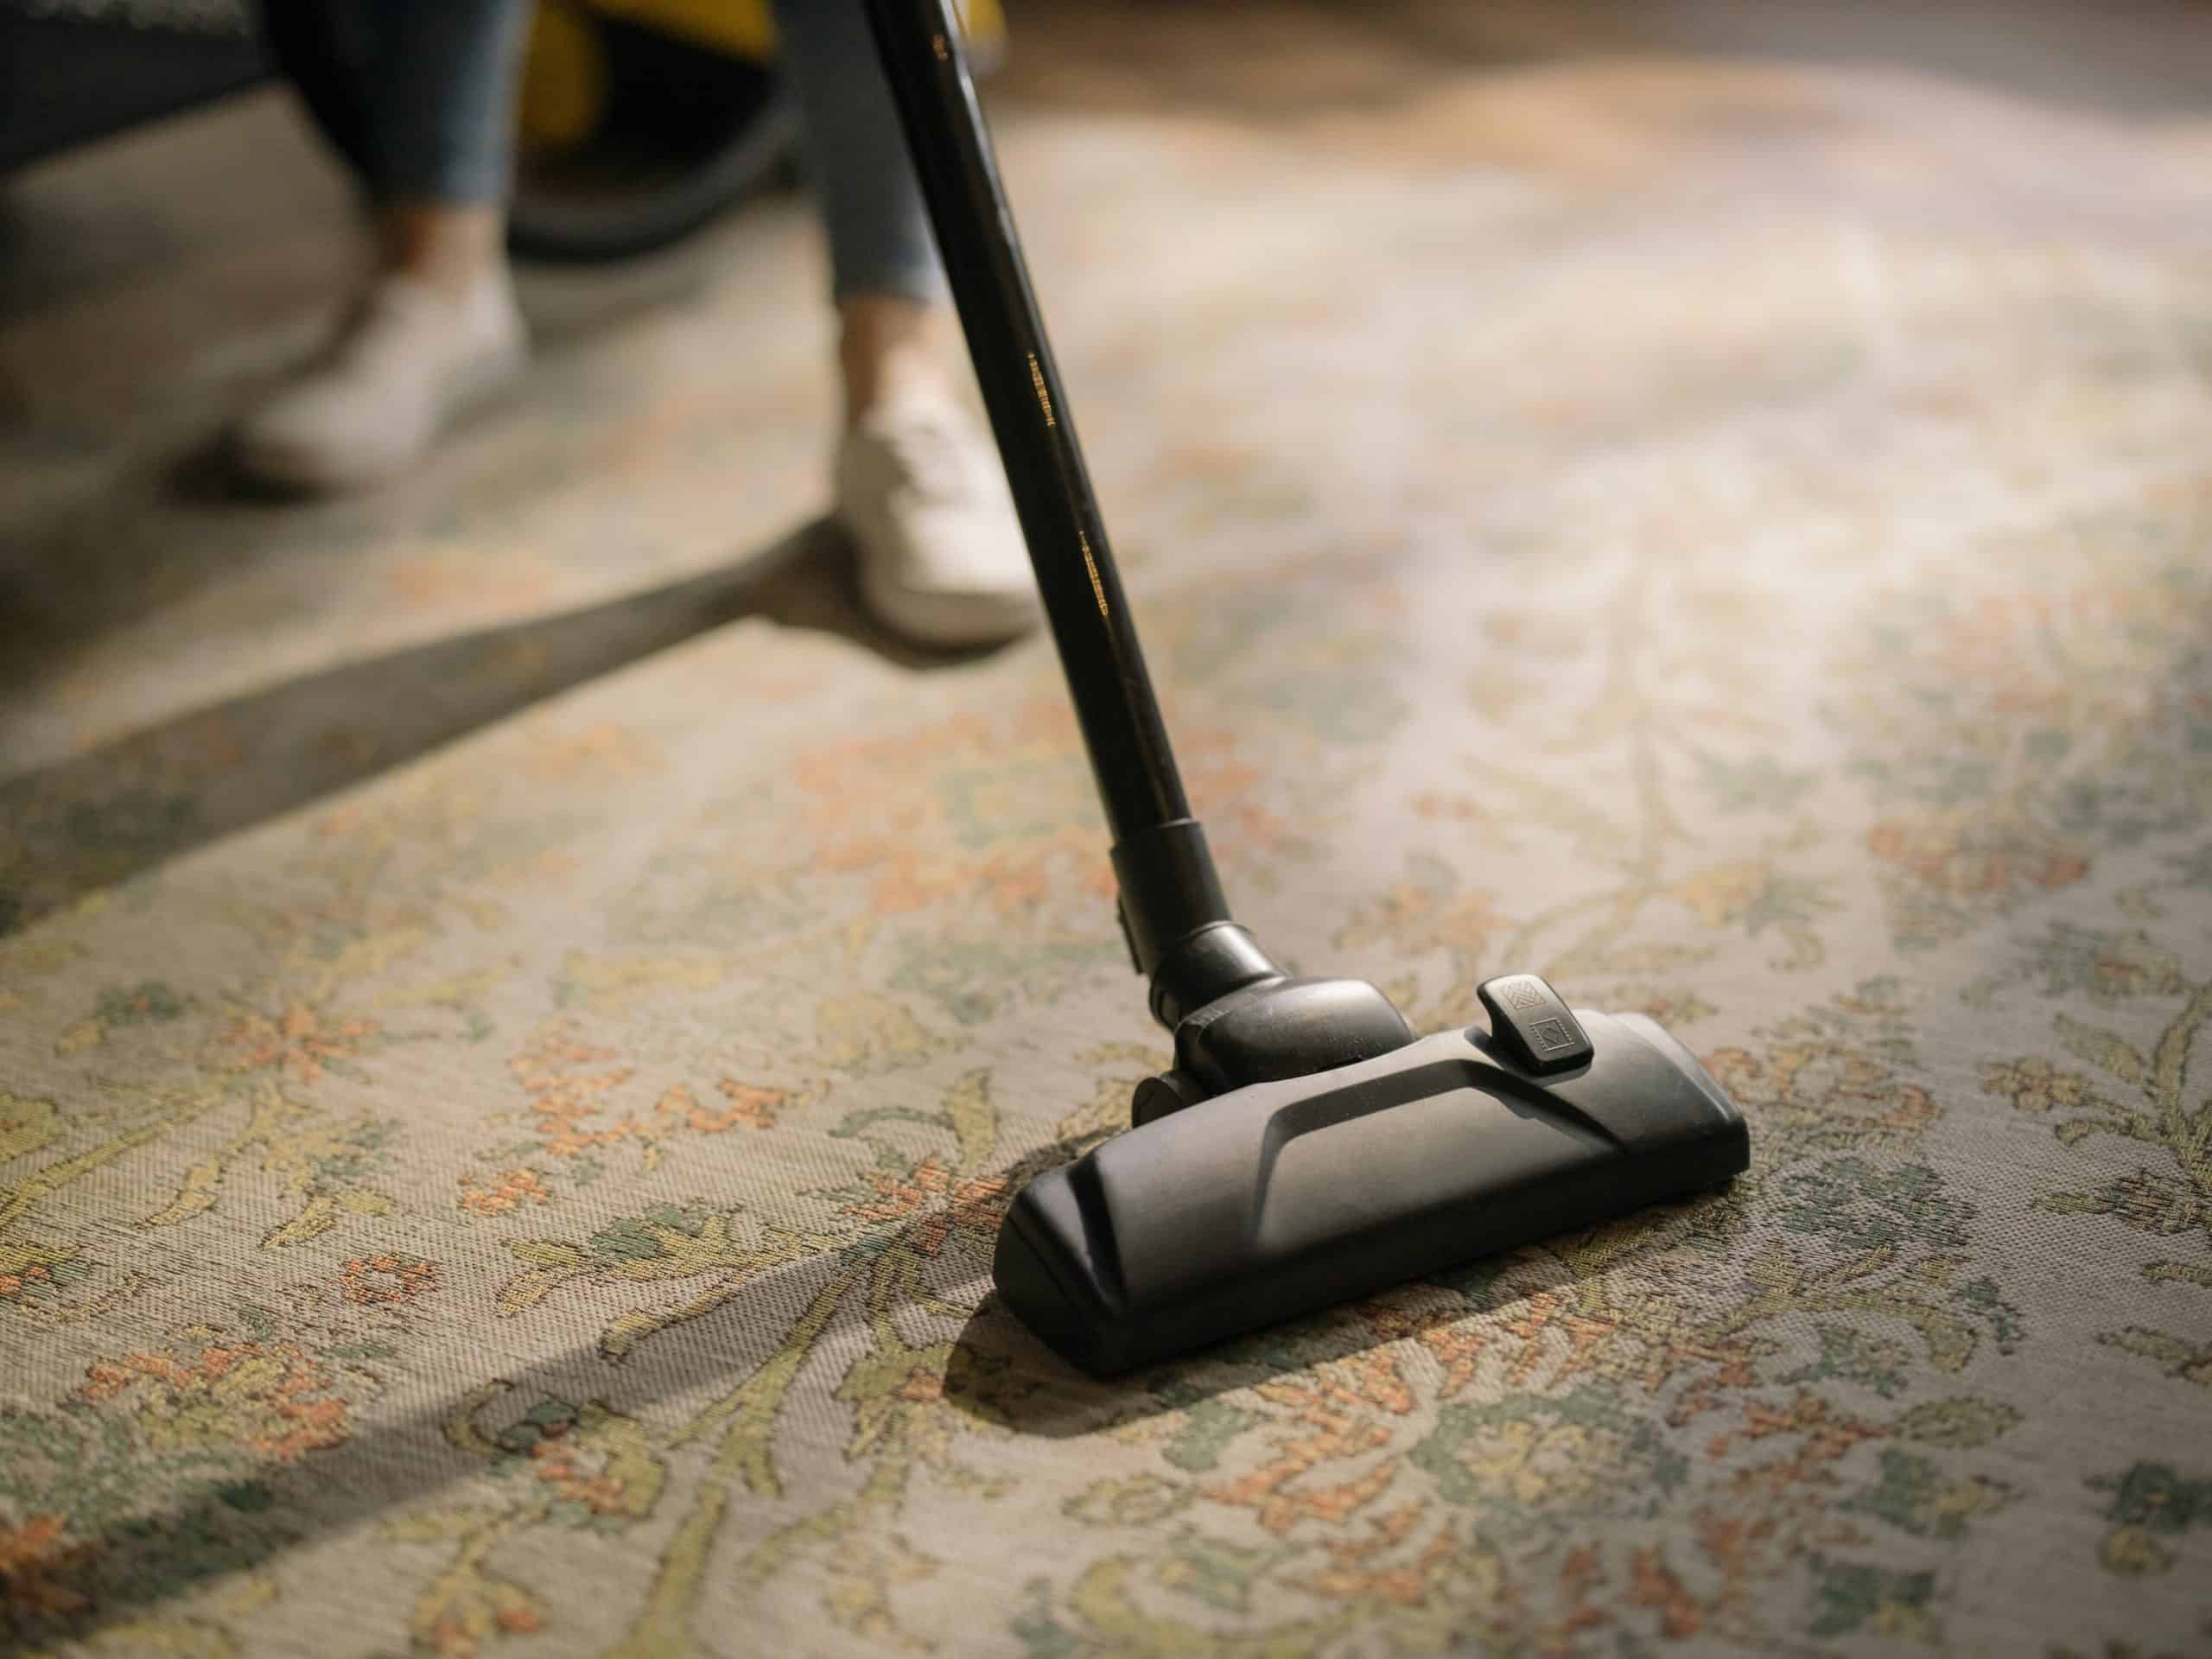 5 Reasons Why Bagless Vacuums are (Usually) the Best Choice